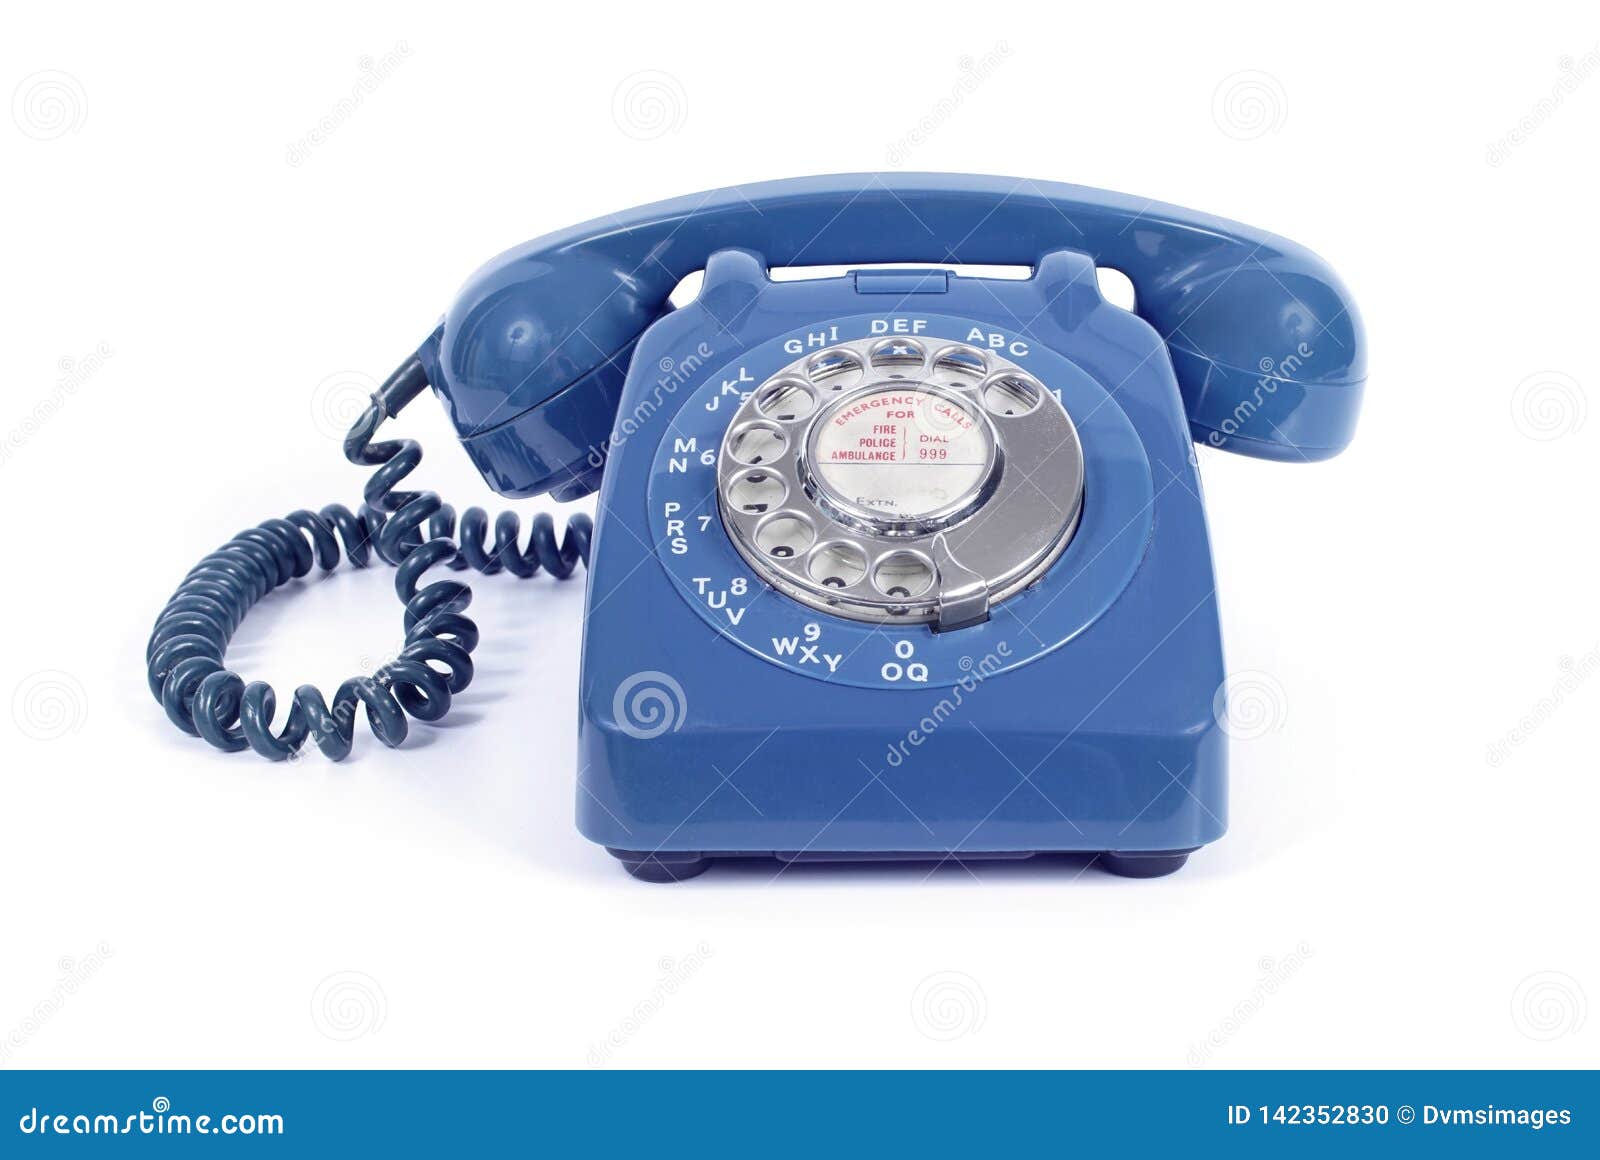 1960s vintage rotary dial blue telephone